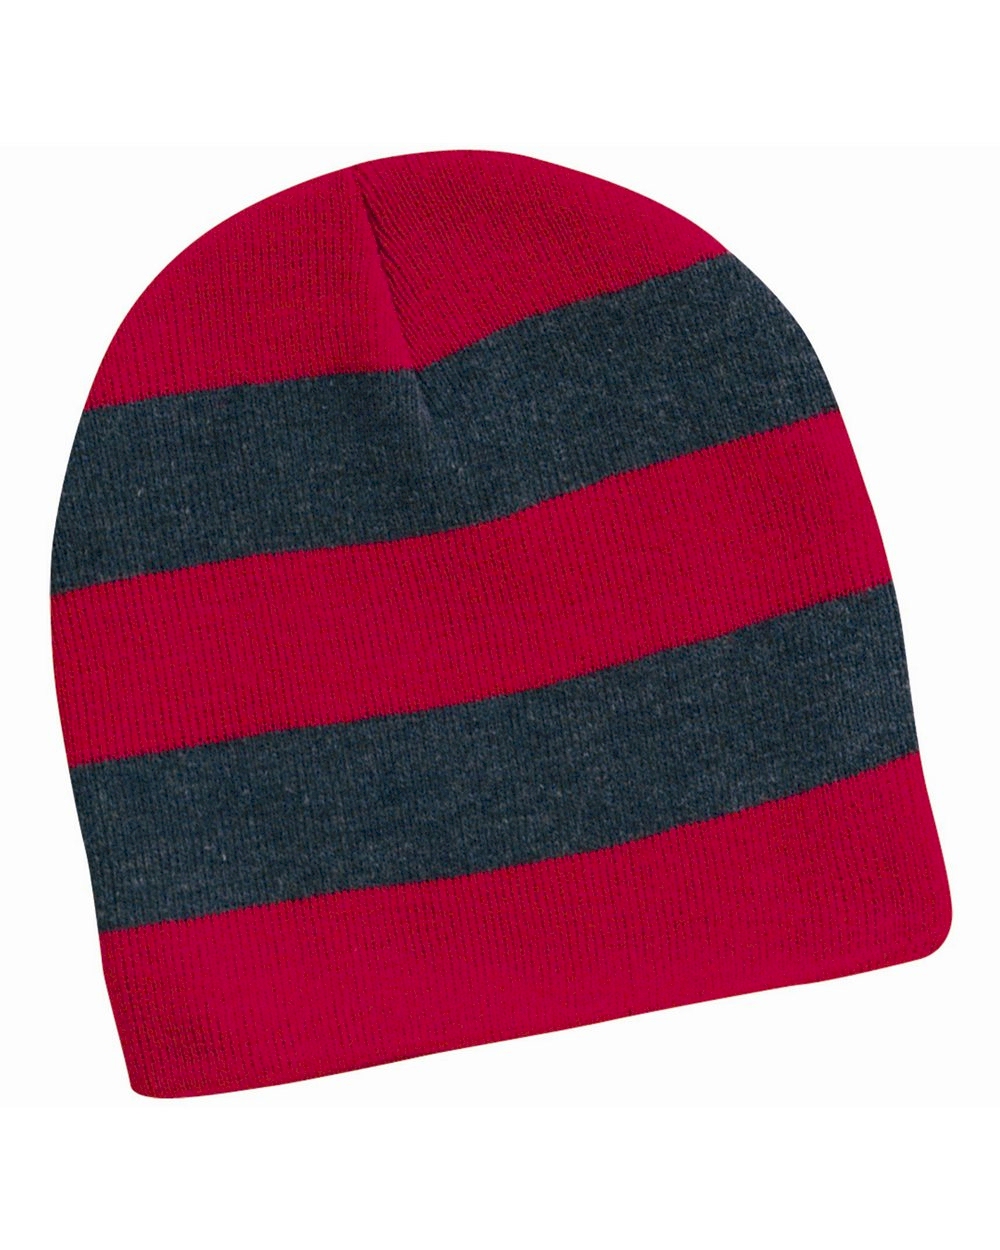 Rugby Striped Knit Beanie Embroidery Blanks - Red/Charcoal